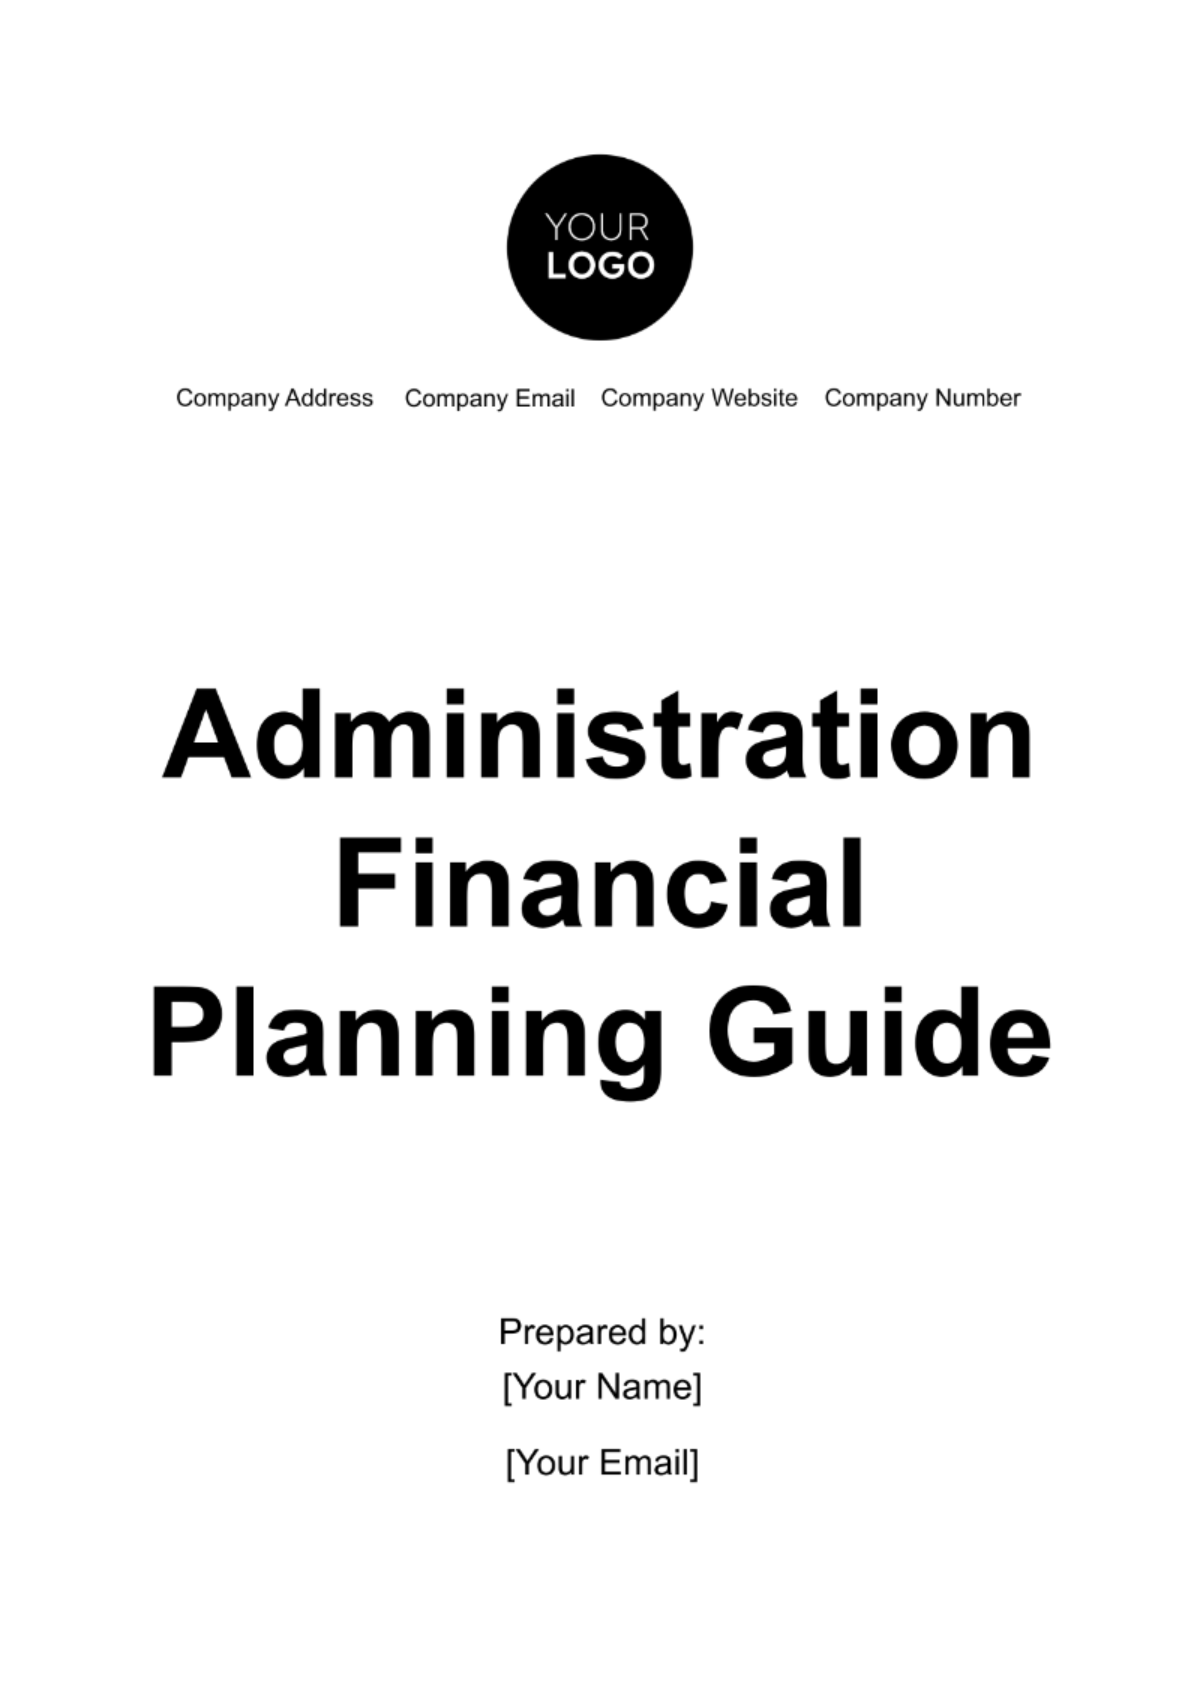 Administration Financial Planning Guide Template